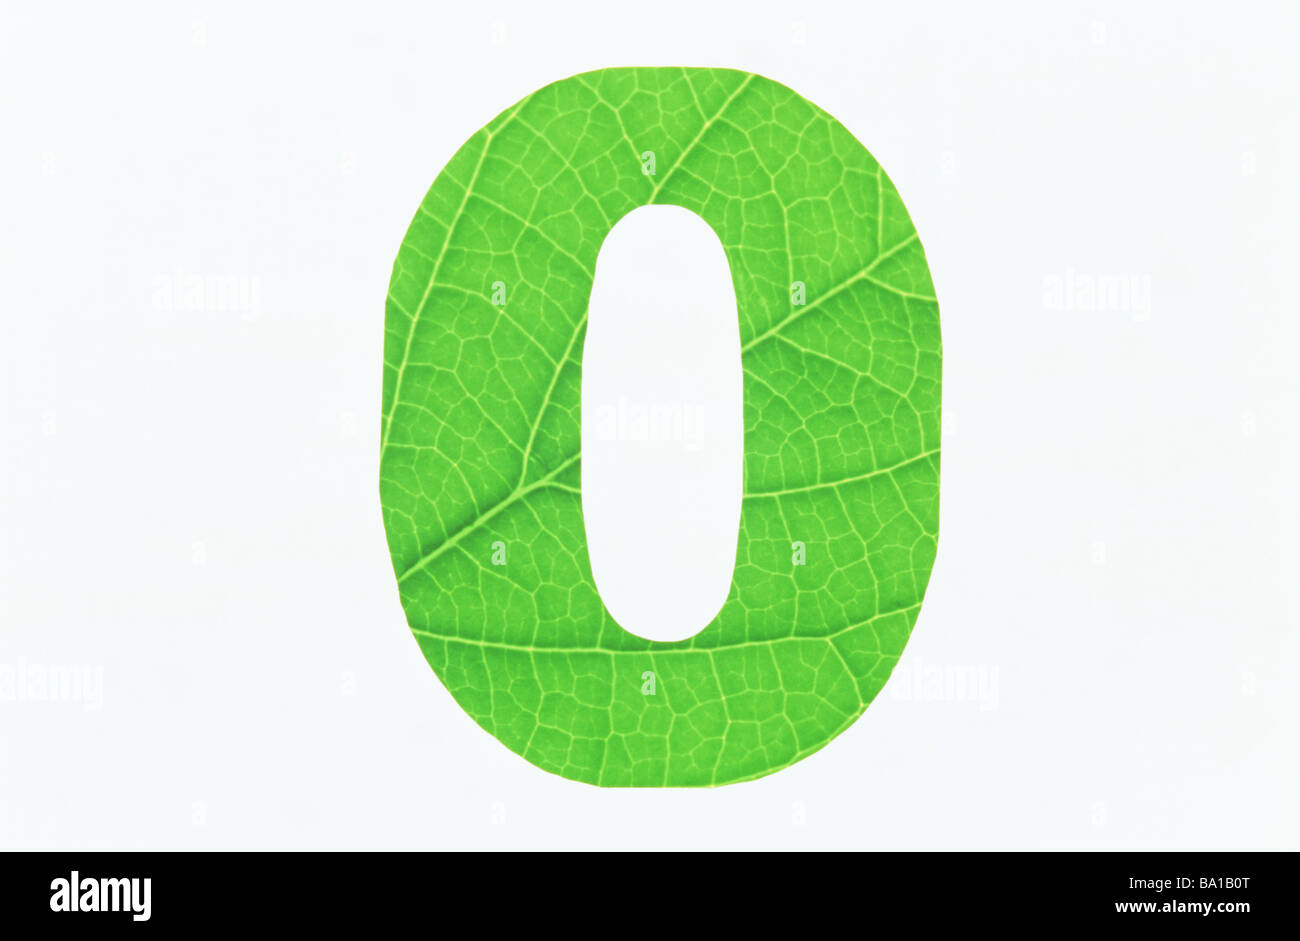 Green Number 0 on White Background Stock Photo